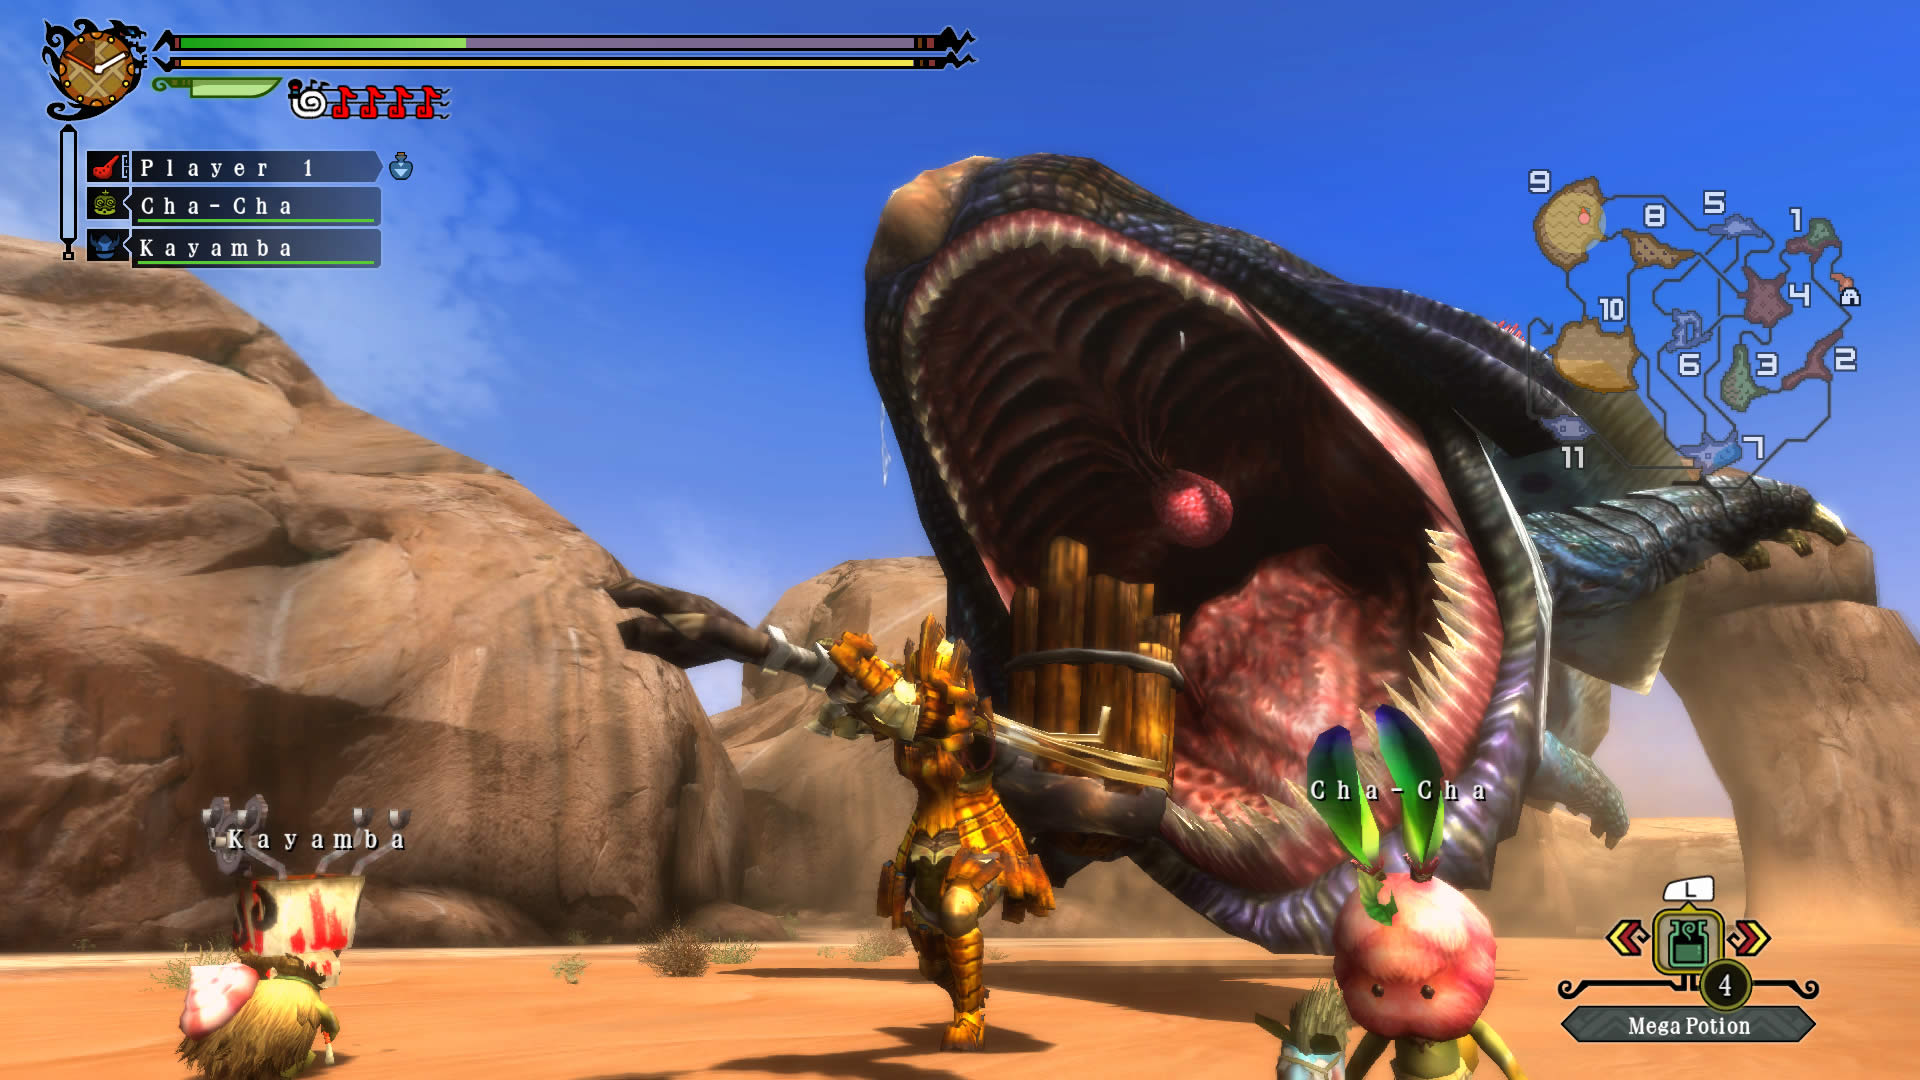 My Thoughts: Monster Hunter 3 Ultimate